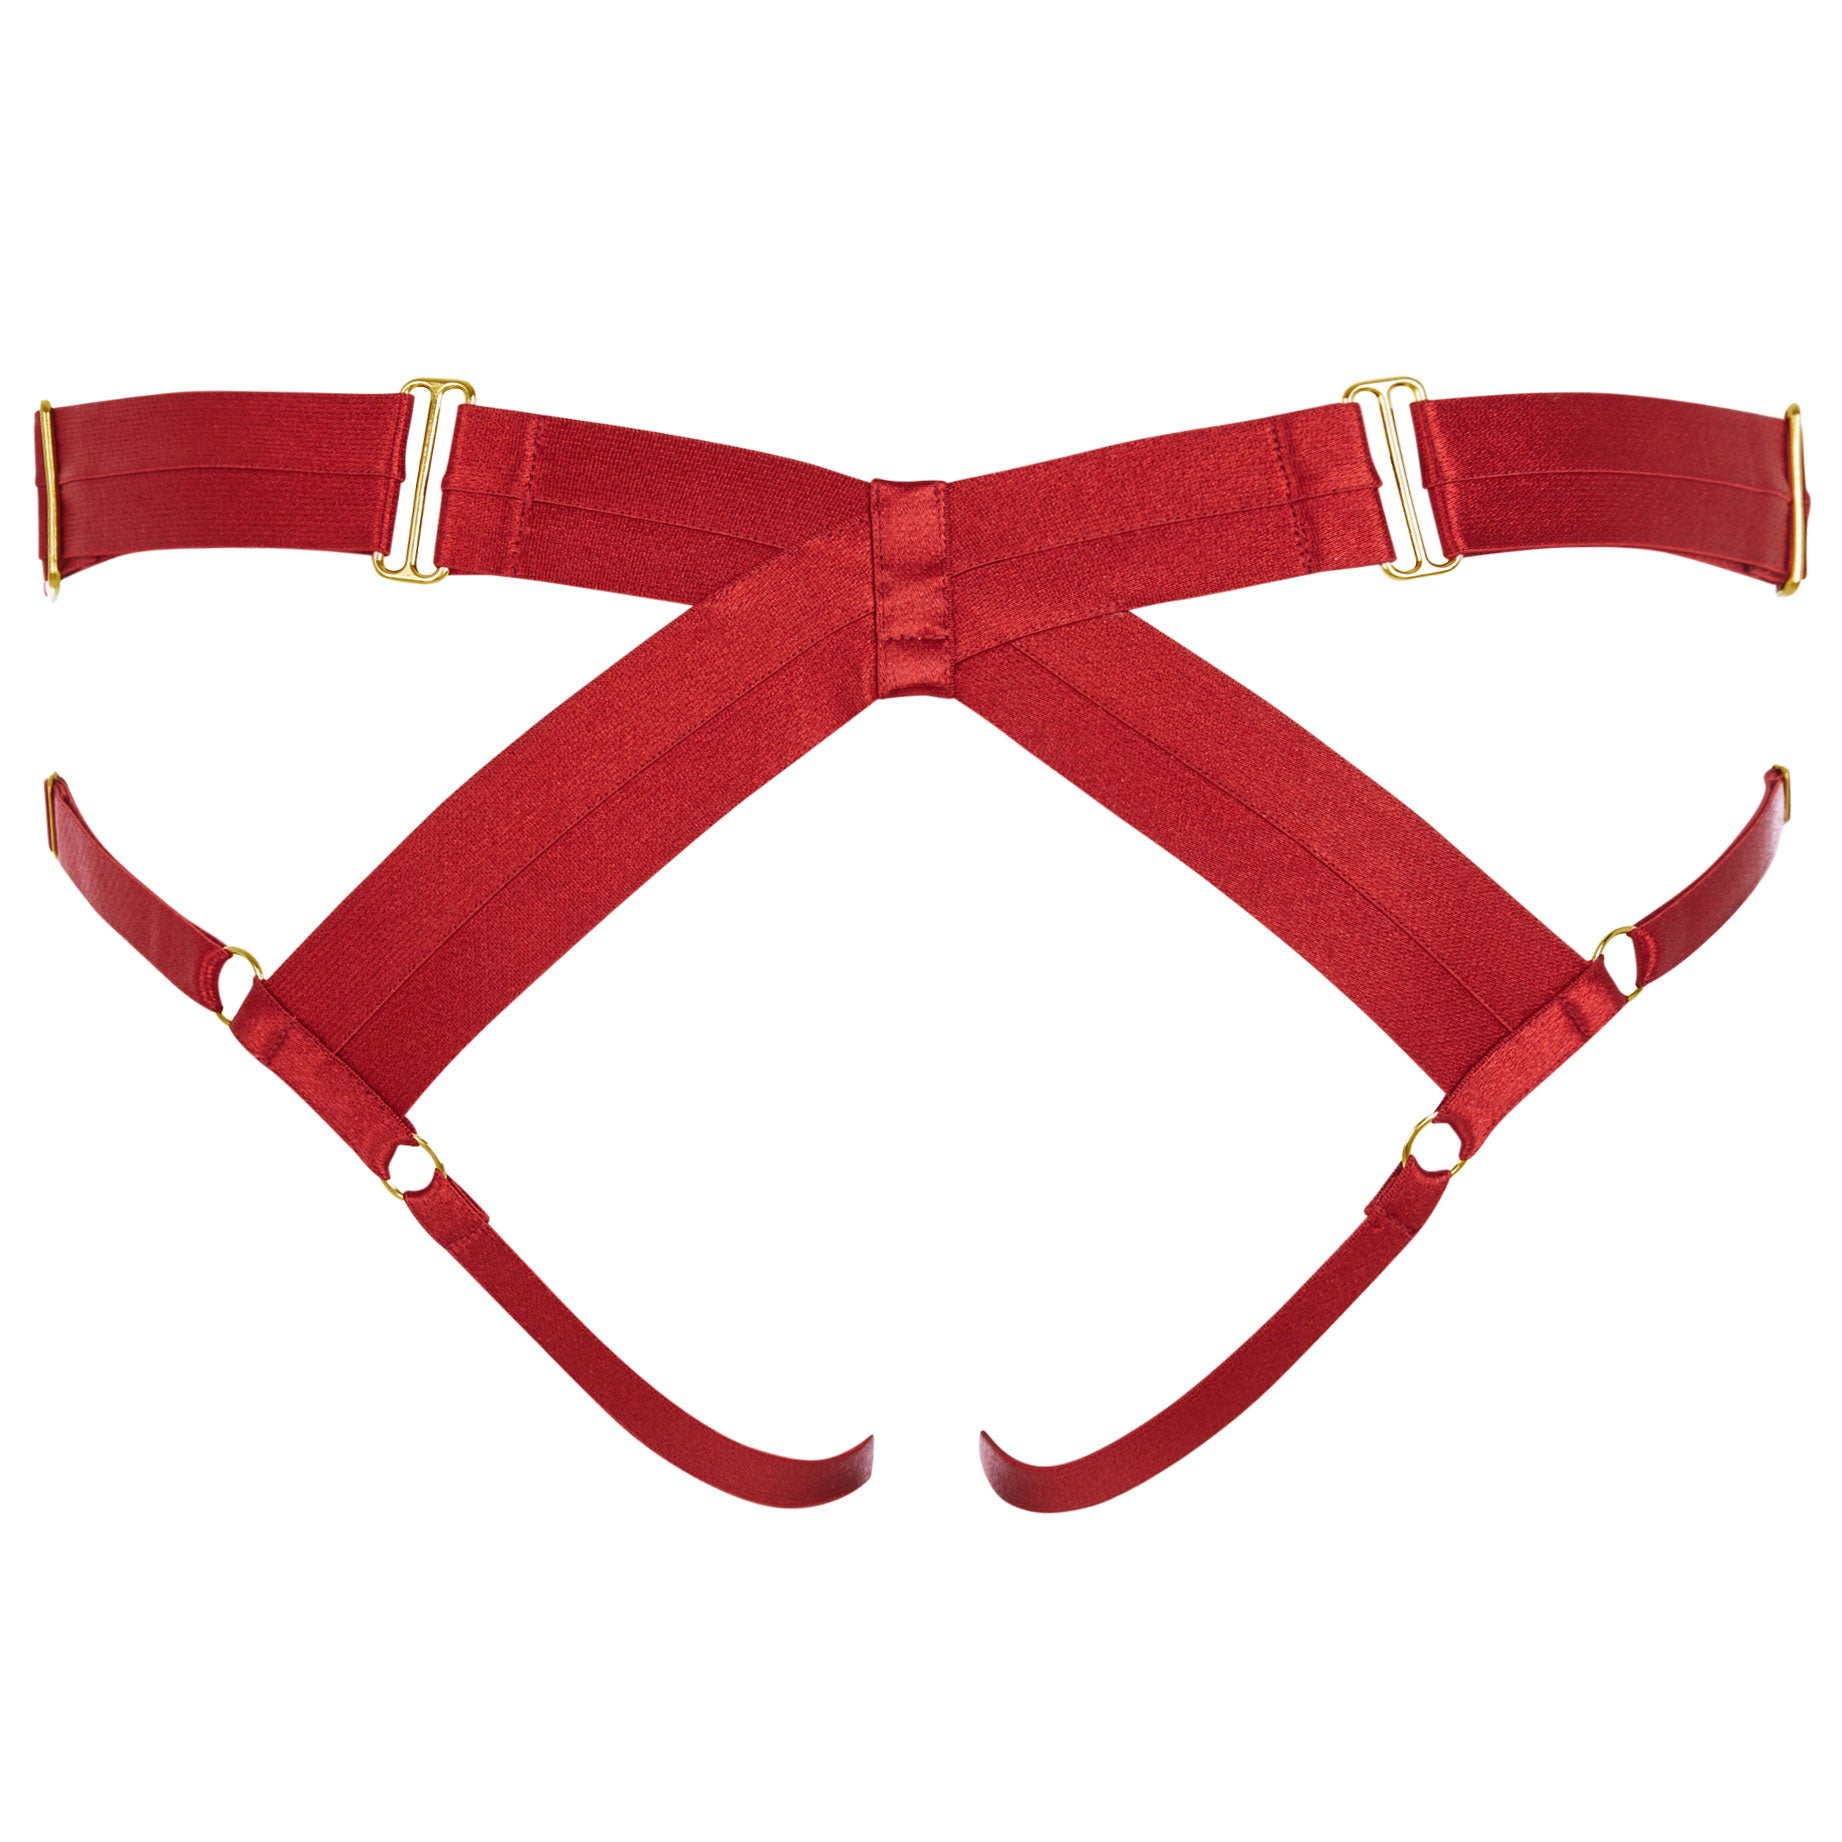 Bordelle Bondage harness brief in red ouvert crotchless knicker